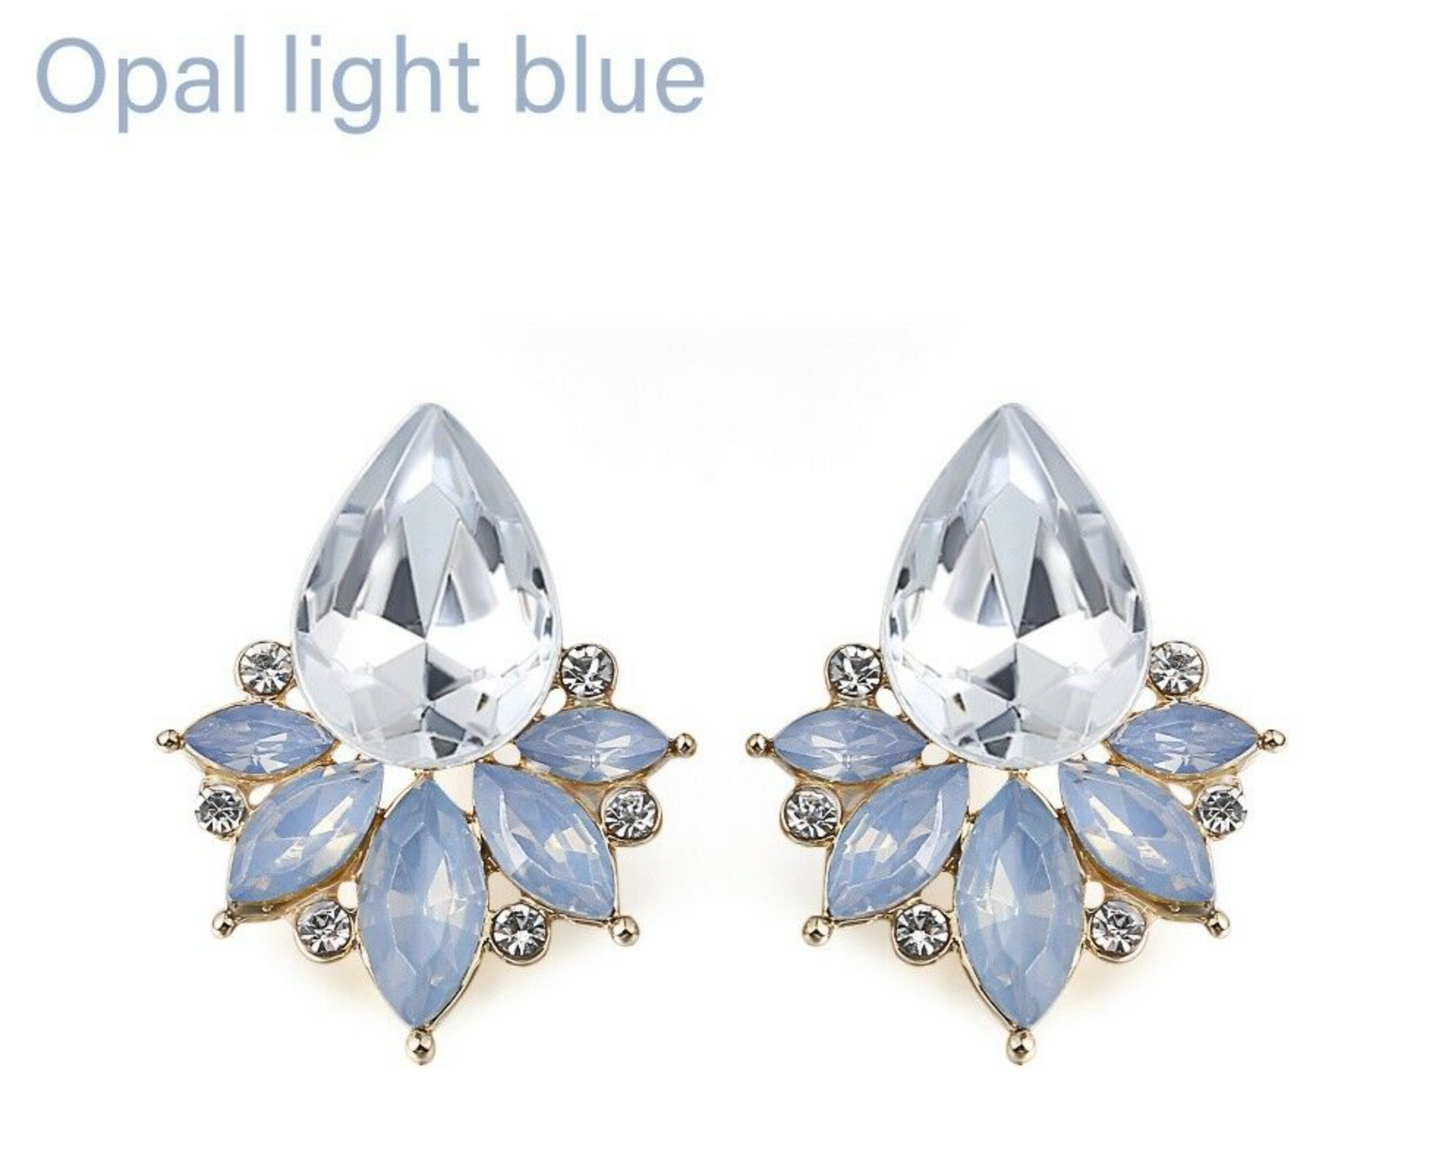 Just the Clear or Light Blue Opal Earrings